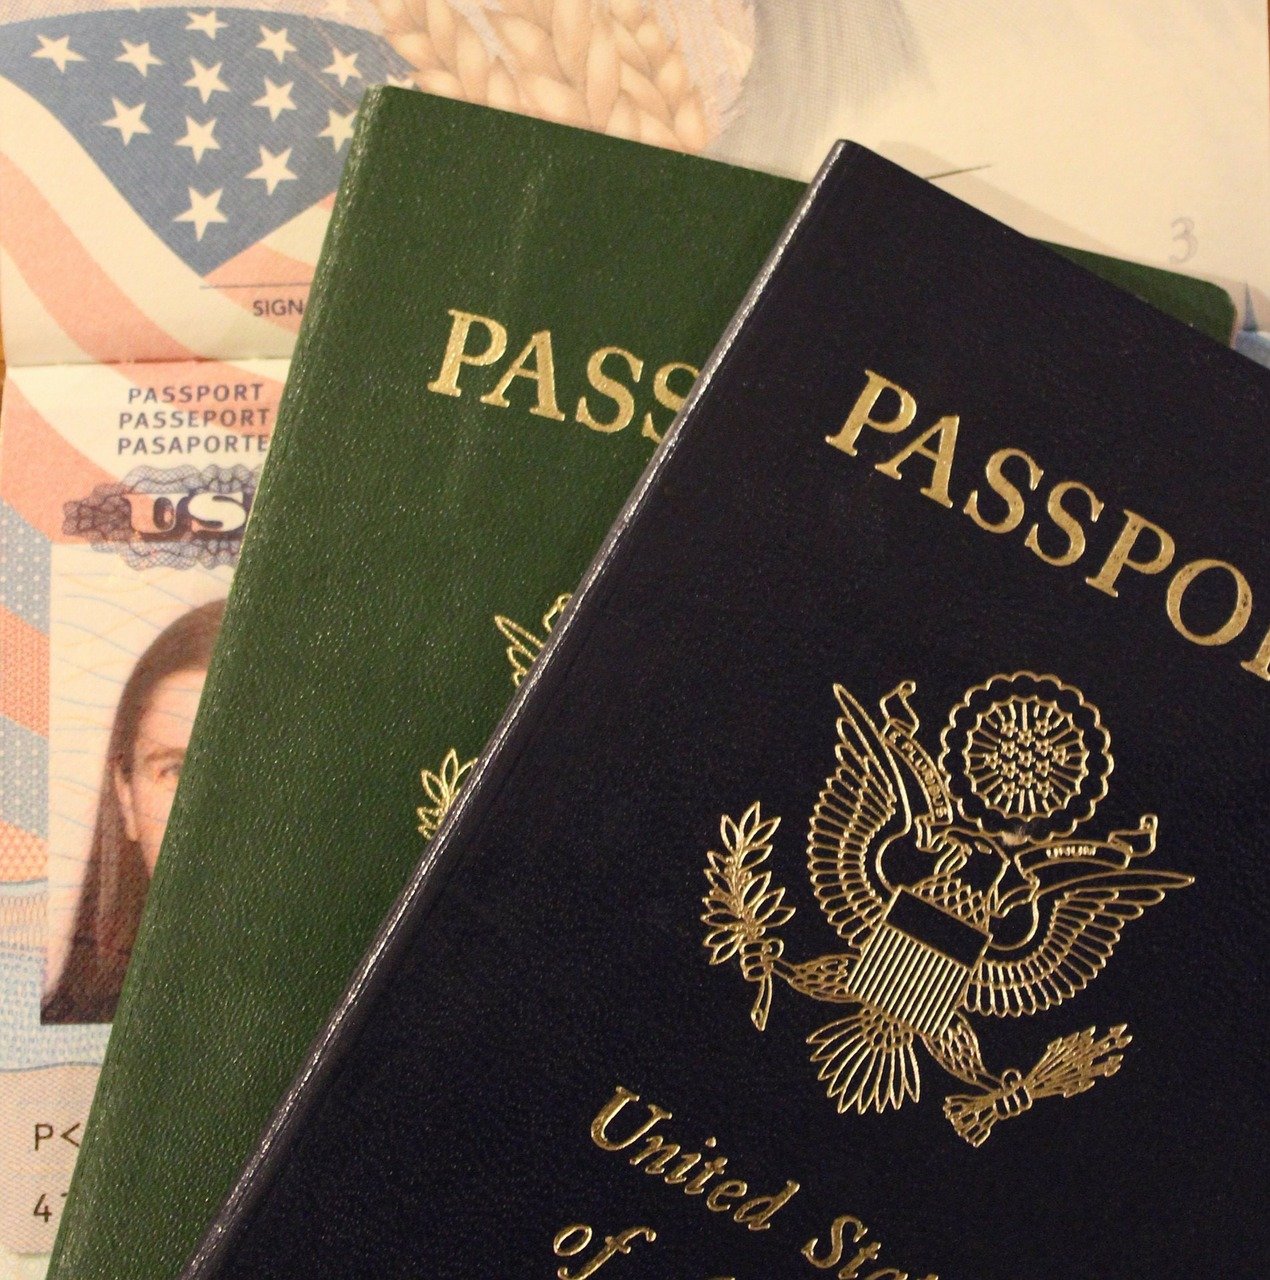 45% jump in enquiries for second passports – the ultimate luxury item for HNW individuals